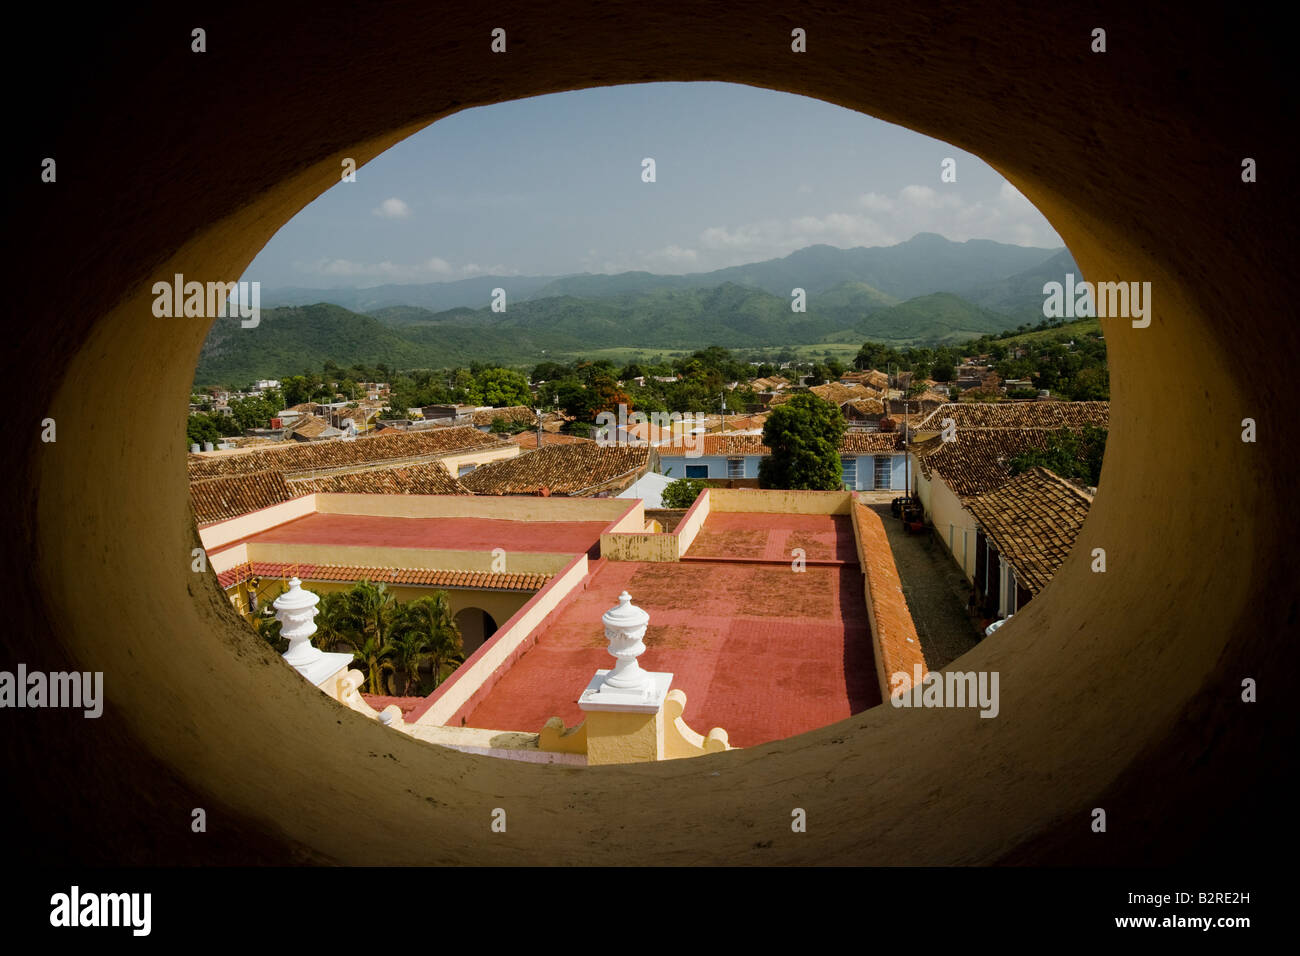 View from the bell tower of the San Francisco de Asis convent Trinidad Cuba on Thursday July 17 2008 Stock Photo